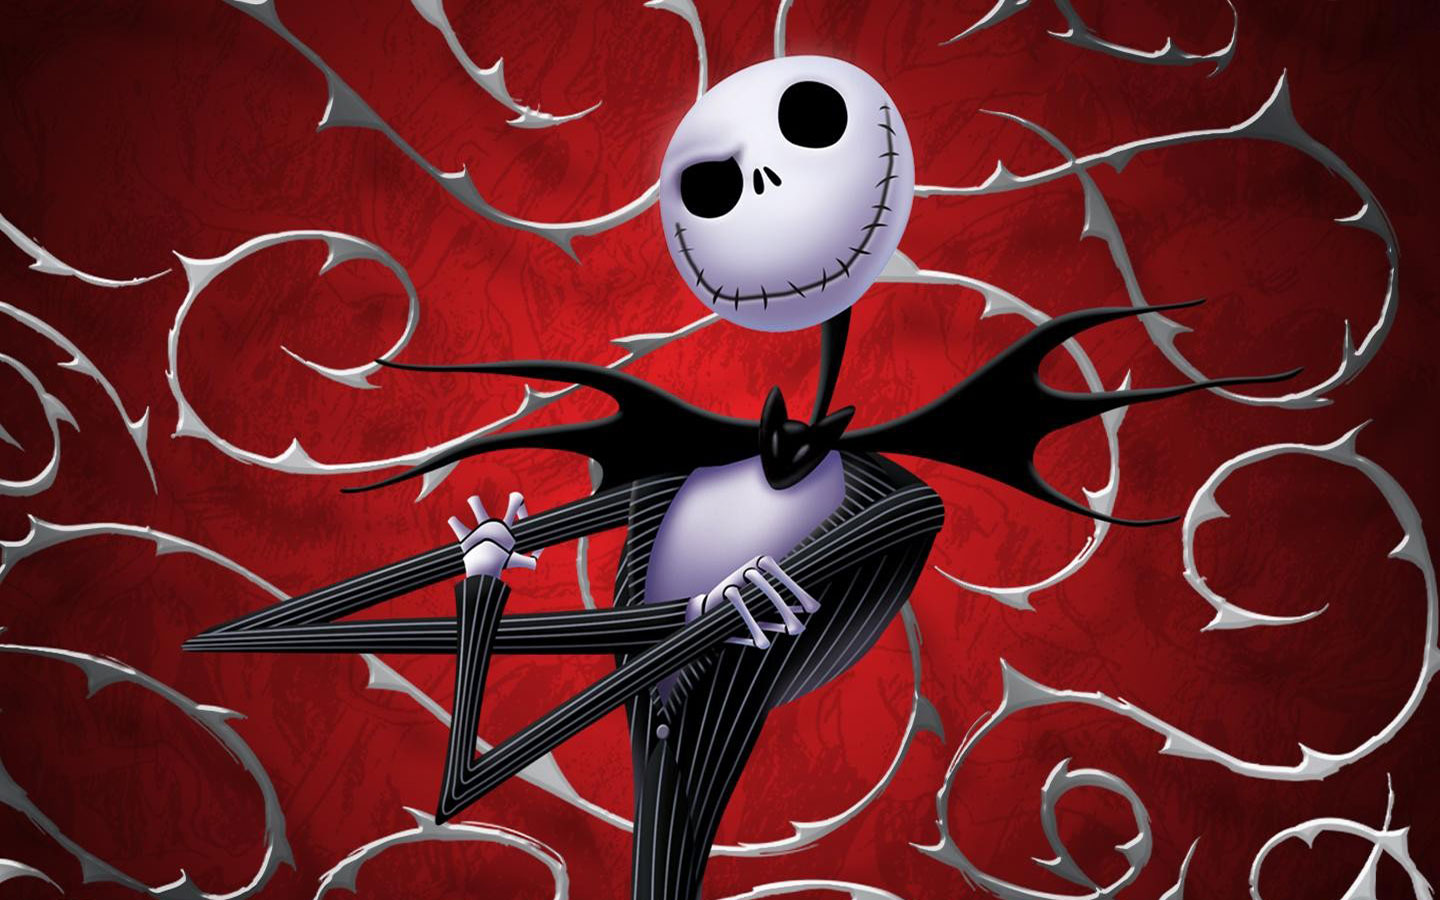 The Nightmare Before Christmas 1440x900